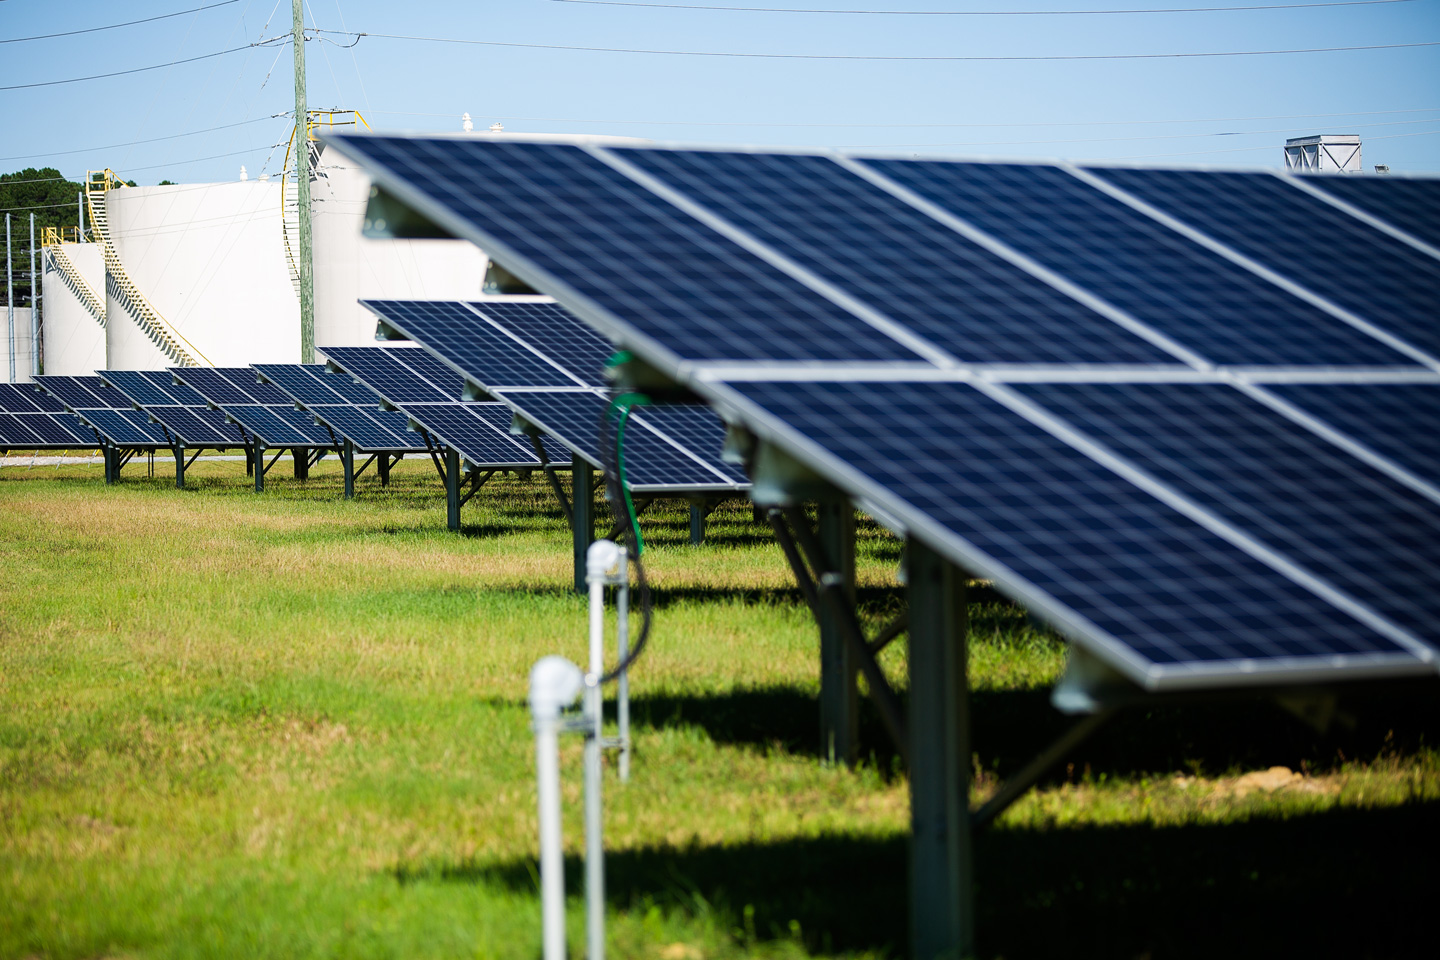 Solar microgrids can generate enough power for 50 residential homes per acre of solar panels.